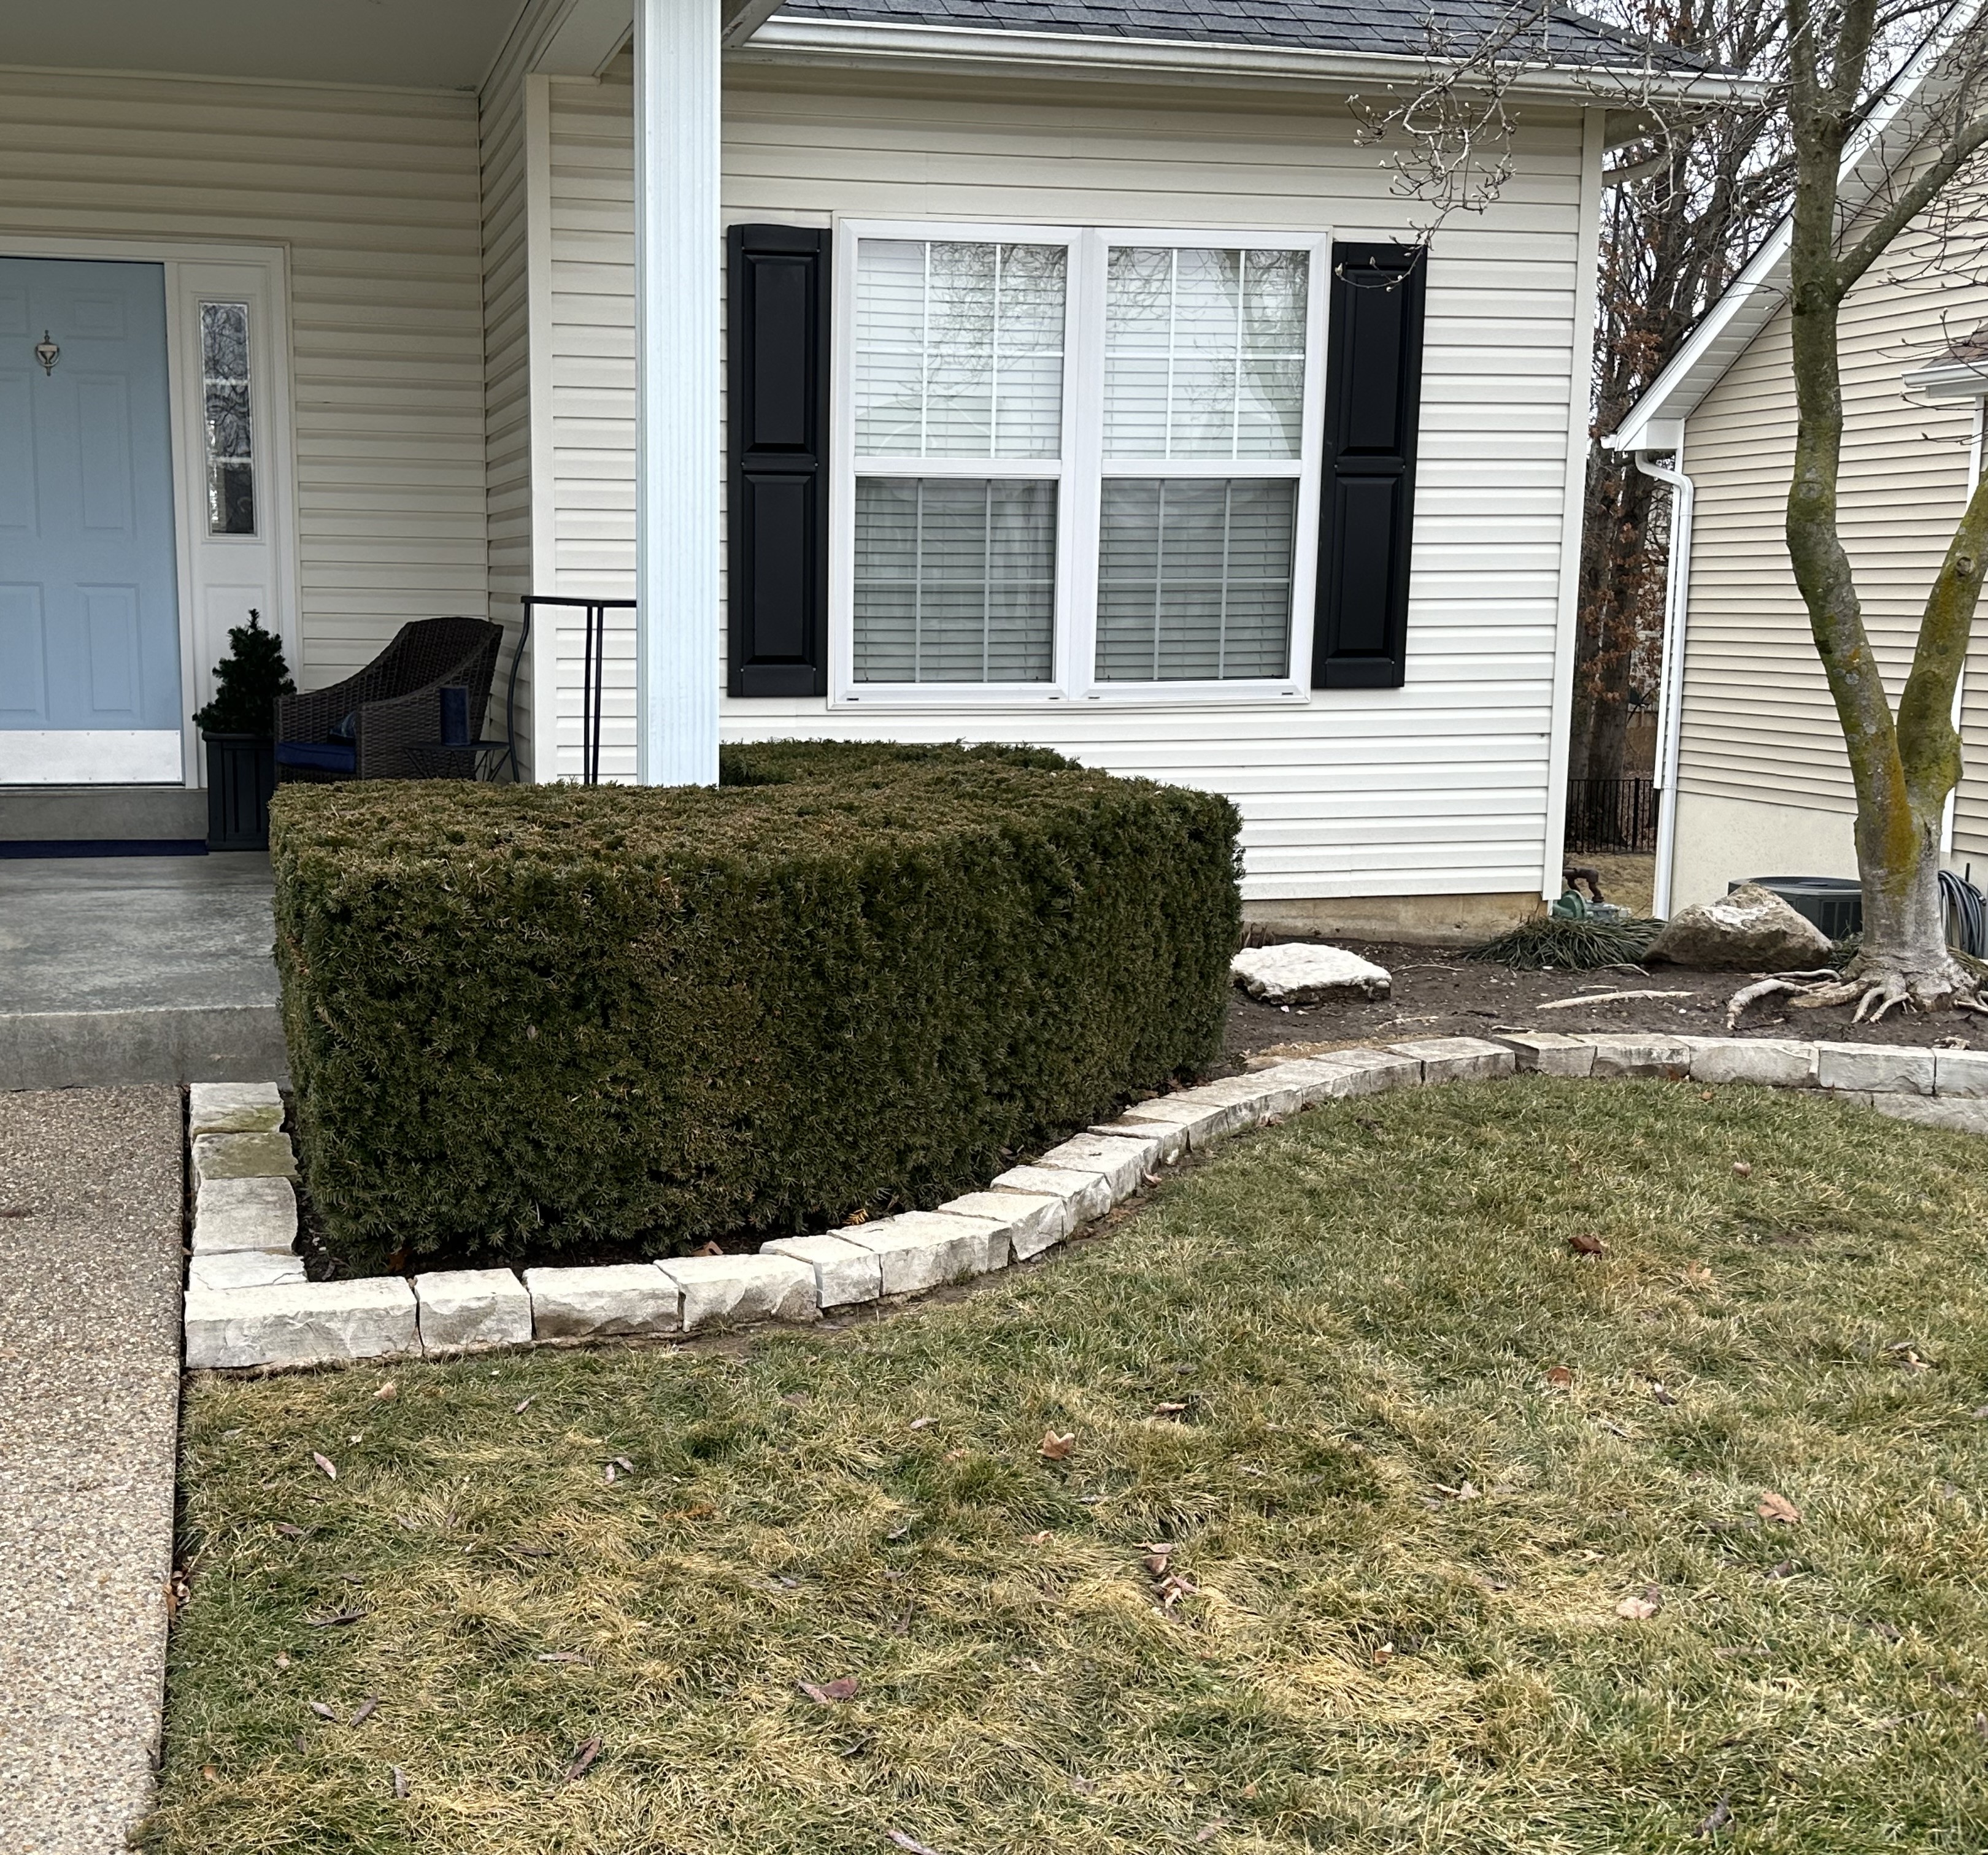 Top Quality, Level and Even Bush Trimming Service Performed in OFallon, MO